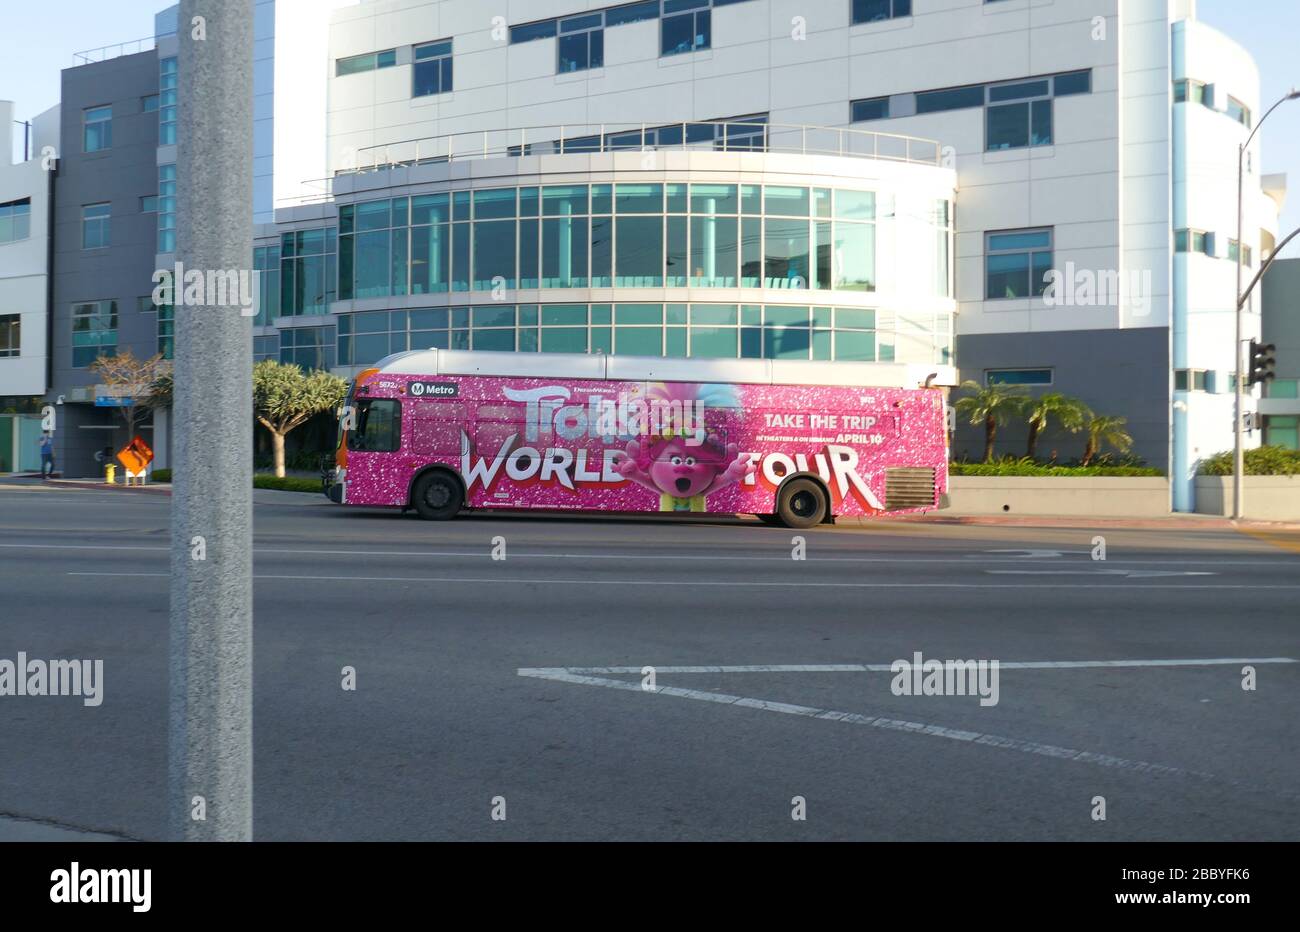 Los Angeles, California, USA 1st April 2020 A general view of atmosphere of Trolls World Tour on Bus with empty streets due to outbreak of Coronavirus as people practice social distancing during Stay At Home order on April 1, 2020 in Los Angeles, California, USA. Photo by Barry King/Alamy Stock Photo Stock Photo